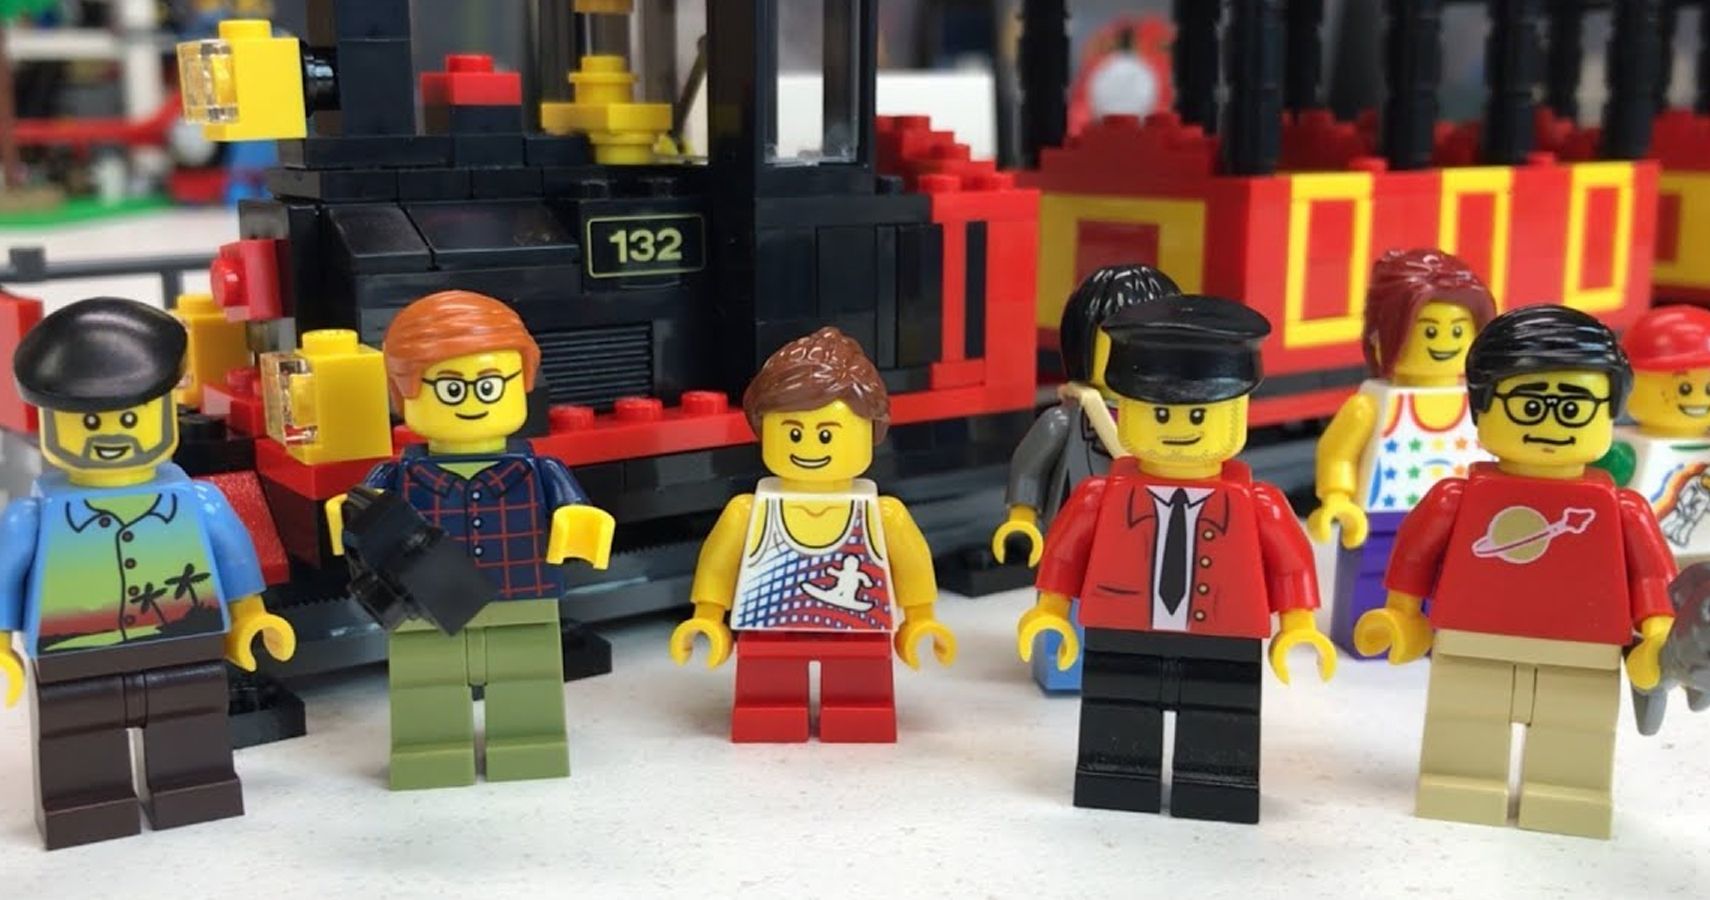 25 Lego Sets That Are Impossible To Find (And How Much They're Worth)